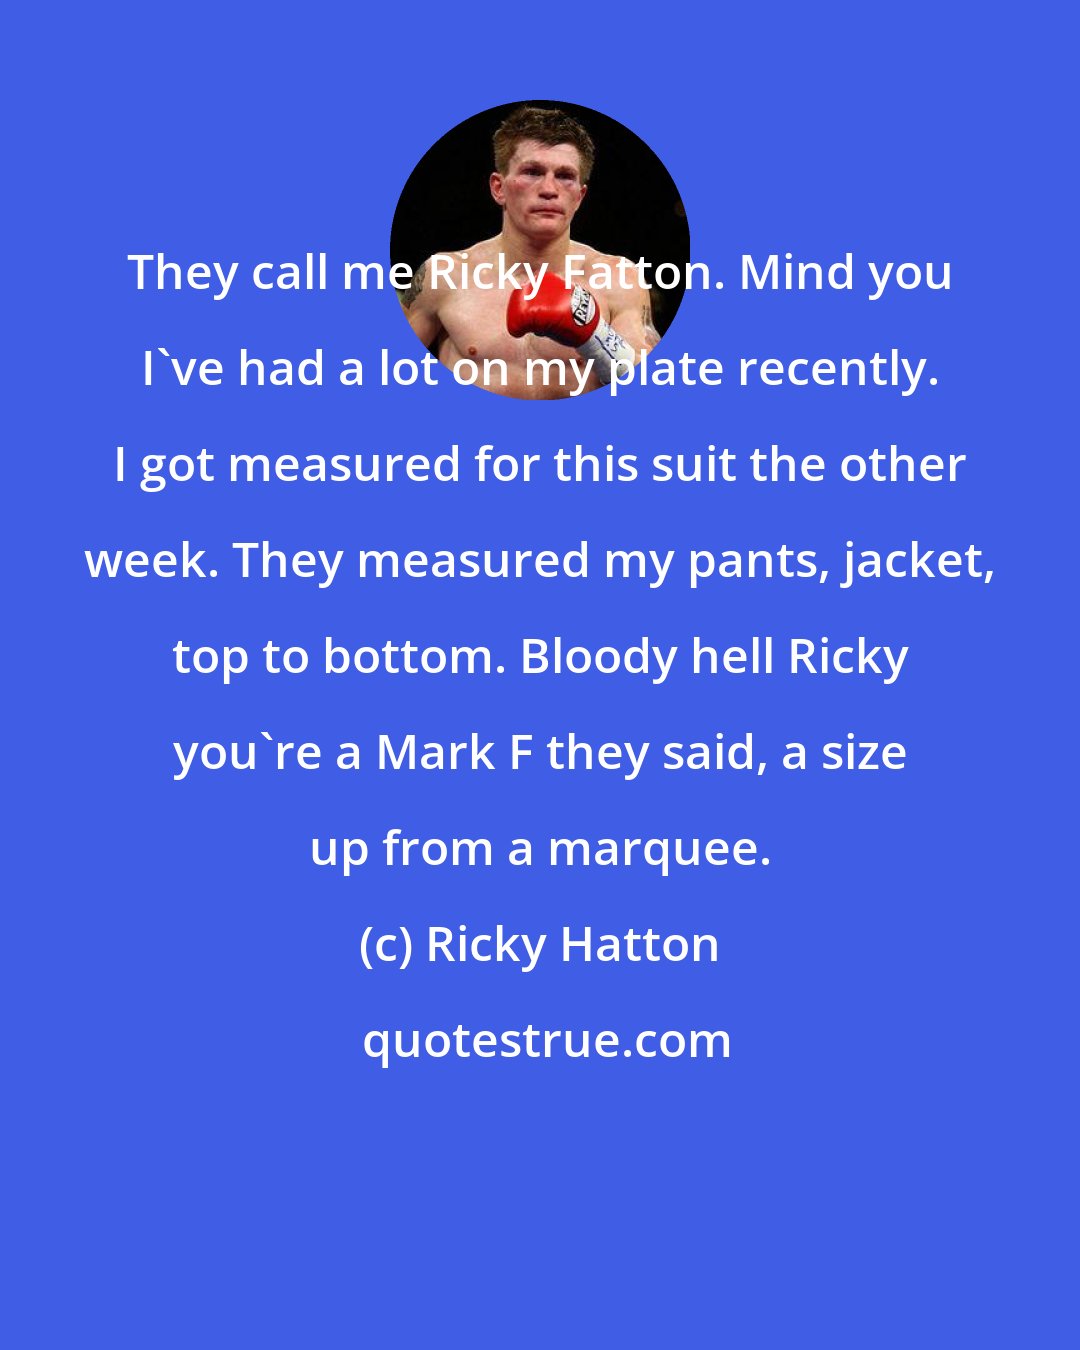 Ricky Hatton: They call me Ricky Fatton. Mind you I've had a lot on my plate recently. I got measured for this suit the other week. They measured my pants, jacket, top to bottom. Bloody hell Ricky you're a Mark F they said, a size up from a marquee.